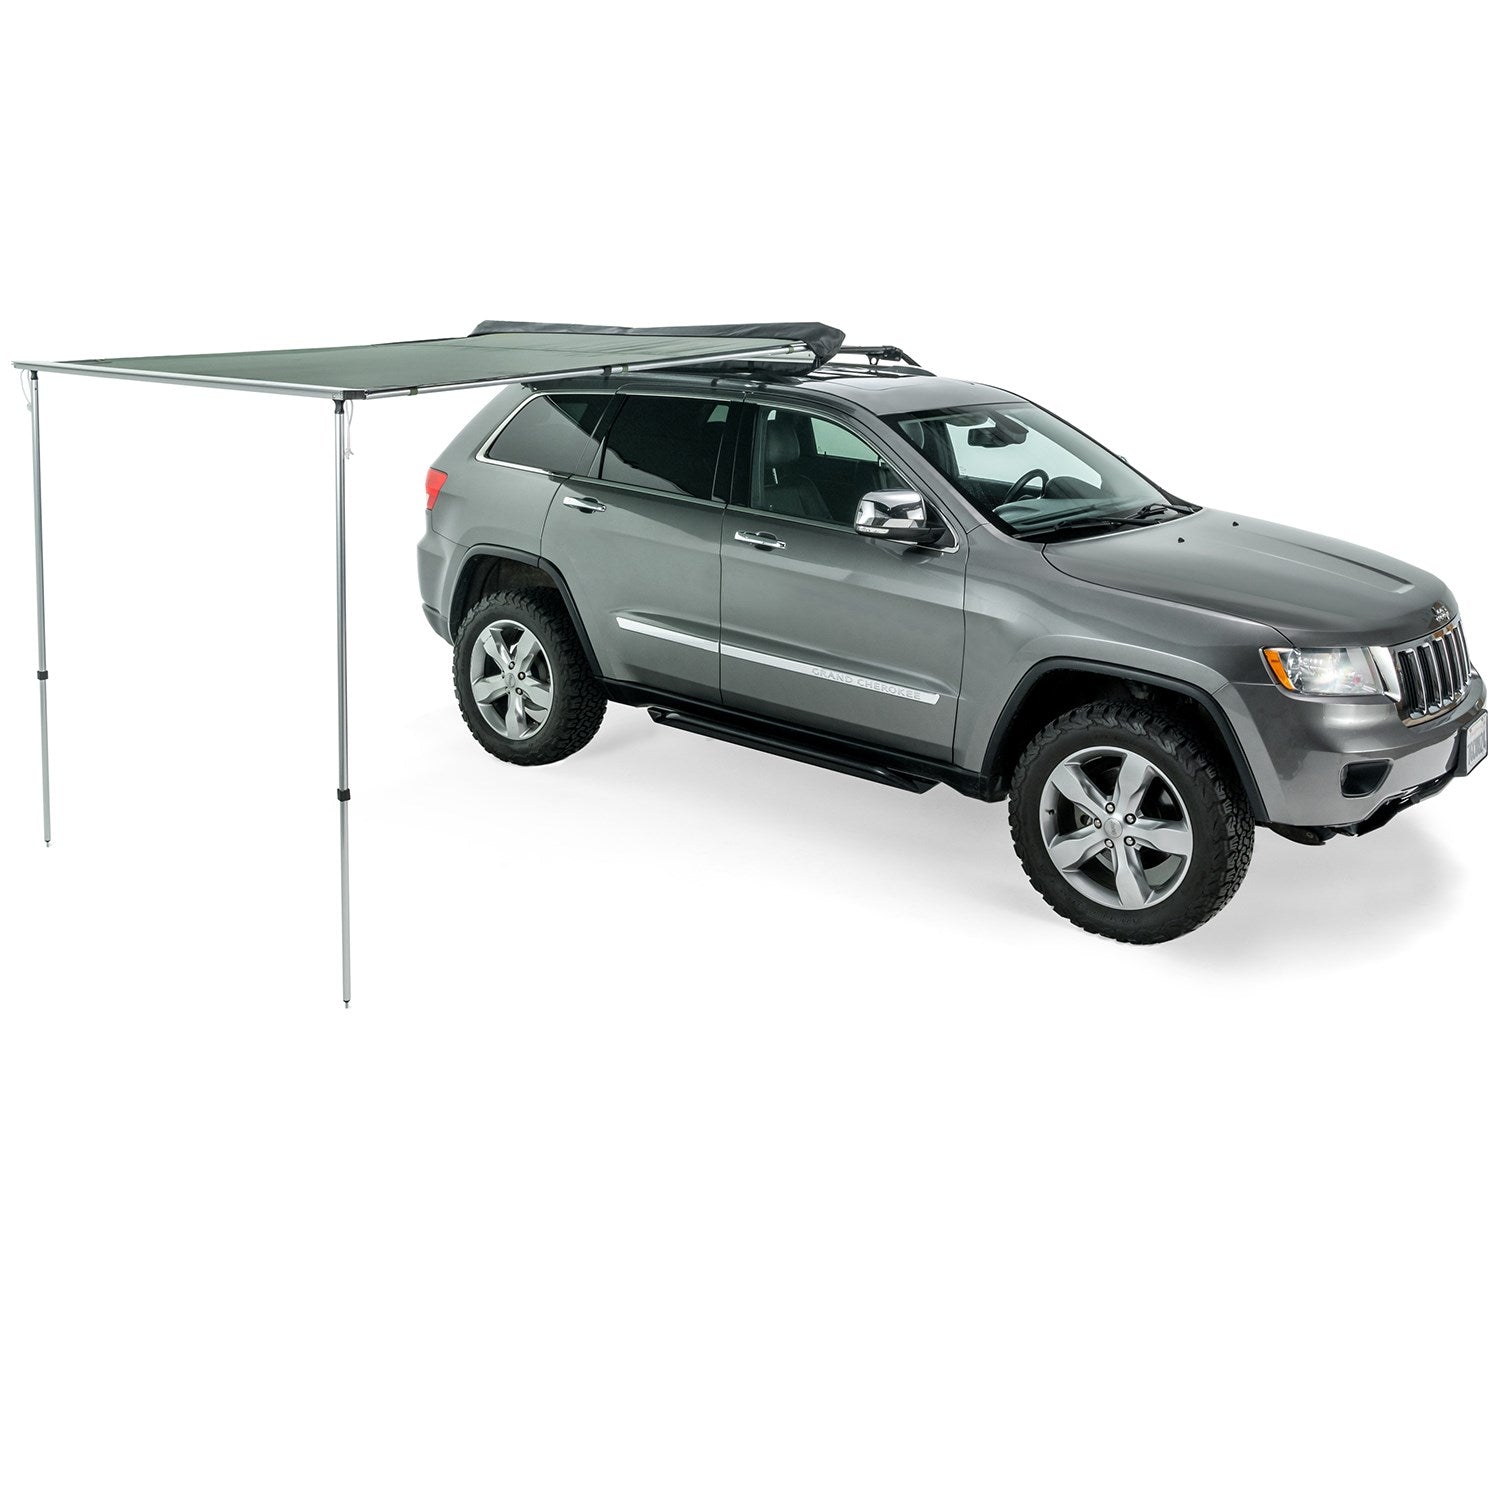 Thule Thule OverCast Awning- 4.5'